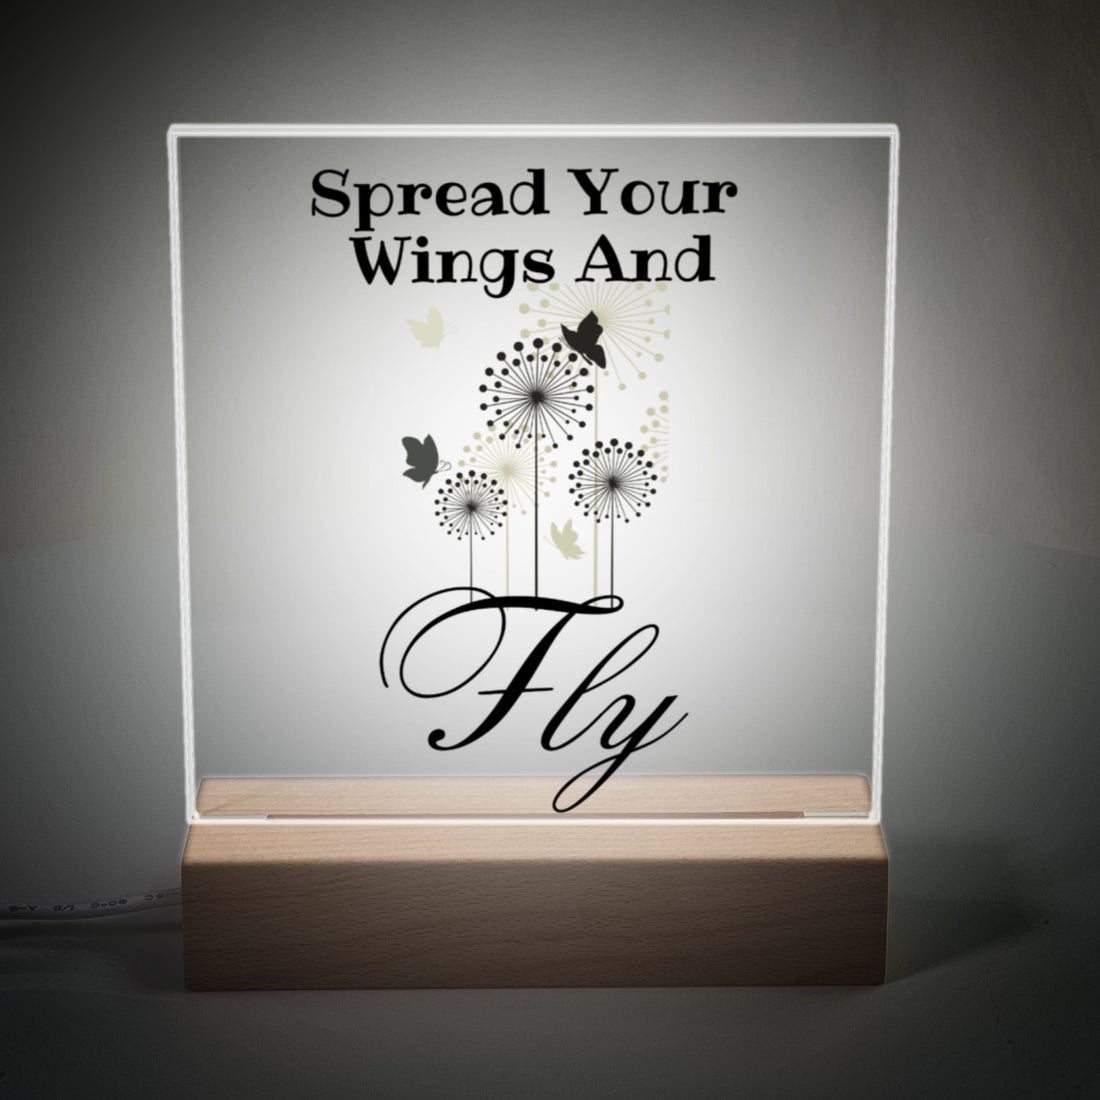 Spread Your Wings Plaque - Positively Sassy - Spread Your Wings Plaque